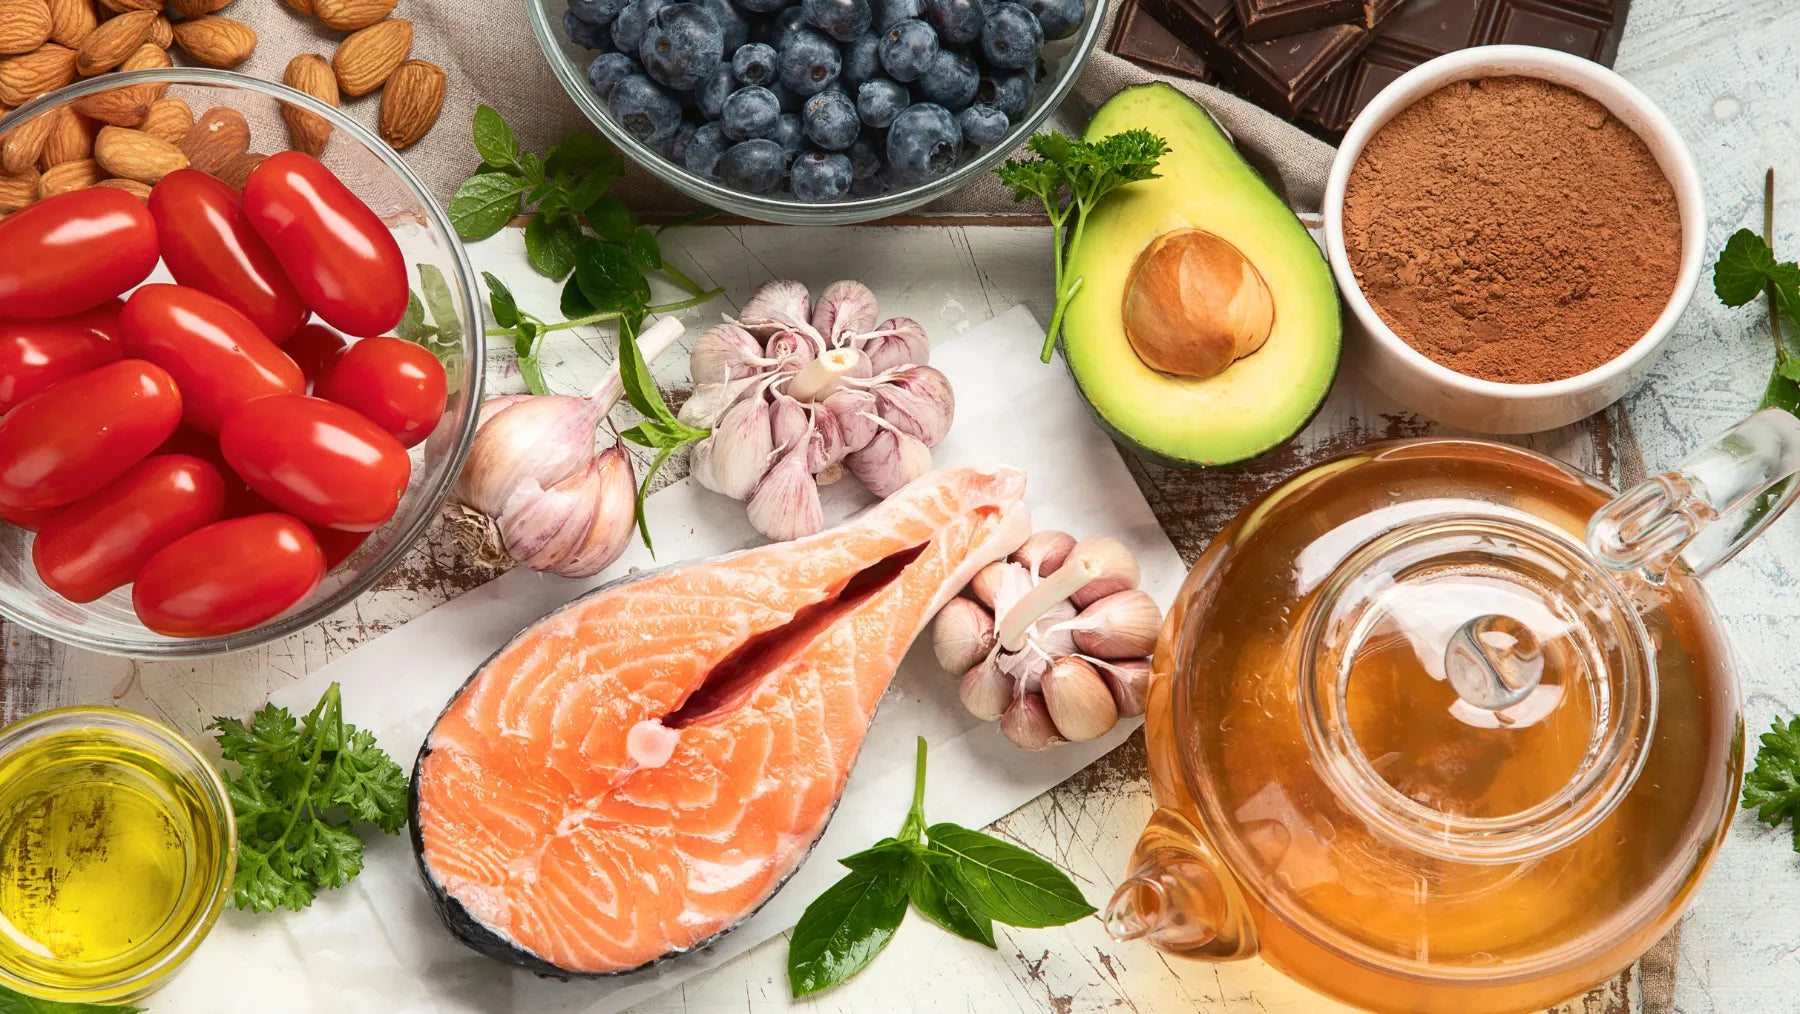 an assortment of foods including salmon, avocado, nuts, berries and chocolate